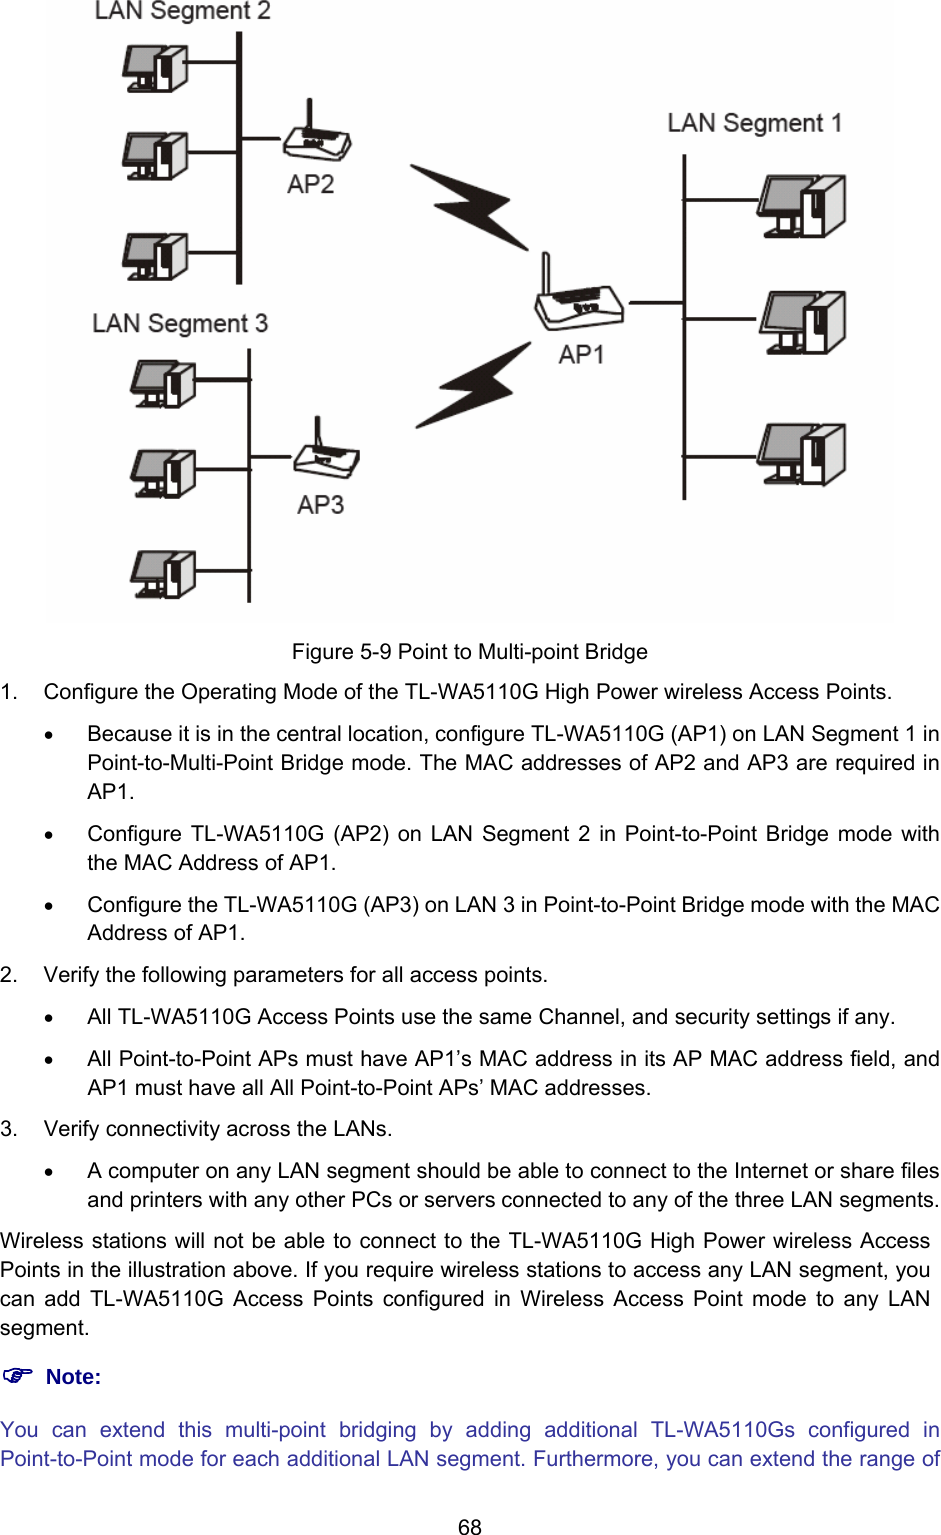  68  Figure 5-9 Point to Multi-point Bridge 1.  Configure the Operating Mode of the TL-WA5110G High Power wireless Access Points. • Because it is in the central location, configure TL-WA5110G (AP1) on LAN Segment 1 in Point-to-Multi-Point Bridge mode. The MAC addresses of AP2 and AP3 are required in AP1. • Configure TL-WA5110G (AP2) on LAN Segment 2 in Point-to-Point Bridge mode with the MAC Address of AP1. • Configure the TL-WA5110G (AP3) on LAN 3 in Point-to-Point Bridge mode with the MAC Address of AP1. 2.  Verify the following parameters for all access points. • All TL-WA5110G Access Points use the same Channel, and security settings if any. • All Point-to-Point APs must have AP1’s MAC address in its AP MAC address field, and AP1 must have all All Point-to-Point APs’ MAC addresses. 3. Verify connectivity across the LANs. • A computer on any LAN segment should be able to connect to the Internet or share files and printers with any other PCs or servers connected to any of the three LAN segments. Wireless stations will not be able to connect to the TL-WA5110G High Power wireless Access Points in the illustration above. If you require wireless stations to access any LAN segment, you can add TL-WA5110G Access Points configured in Wireless Access Point mode to any LAN segment. ) Note: You can extend this multi-point bridging by adding additional TL-WA5110Gs configured in Point-to-Point mode for each additional LAN segment. Furthermore, you can extend the range of 